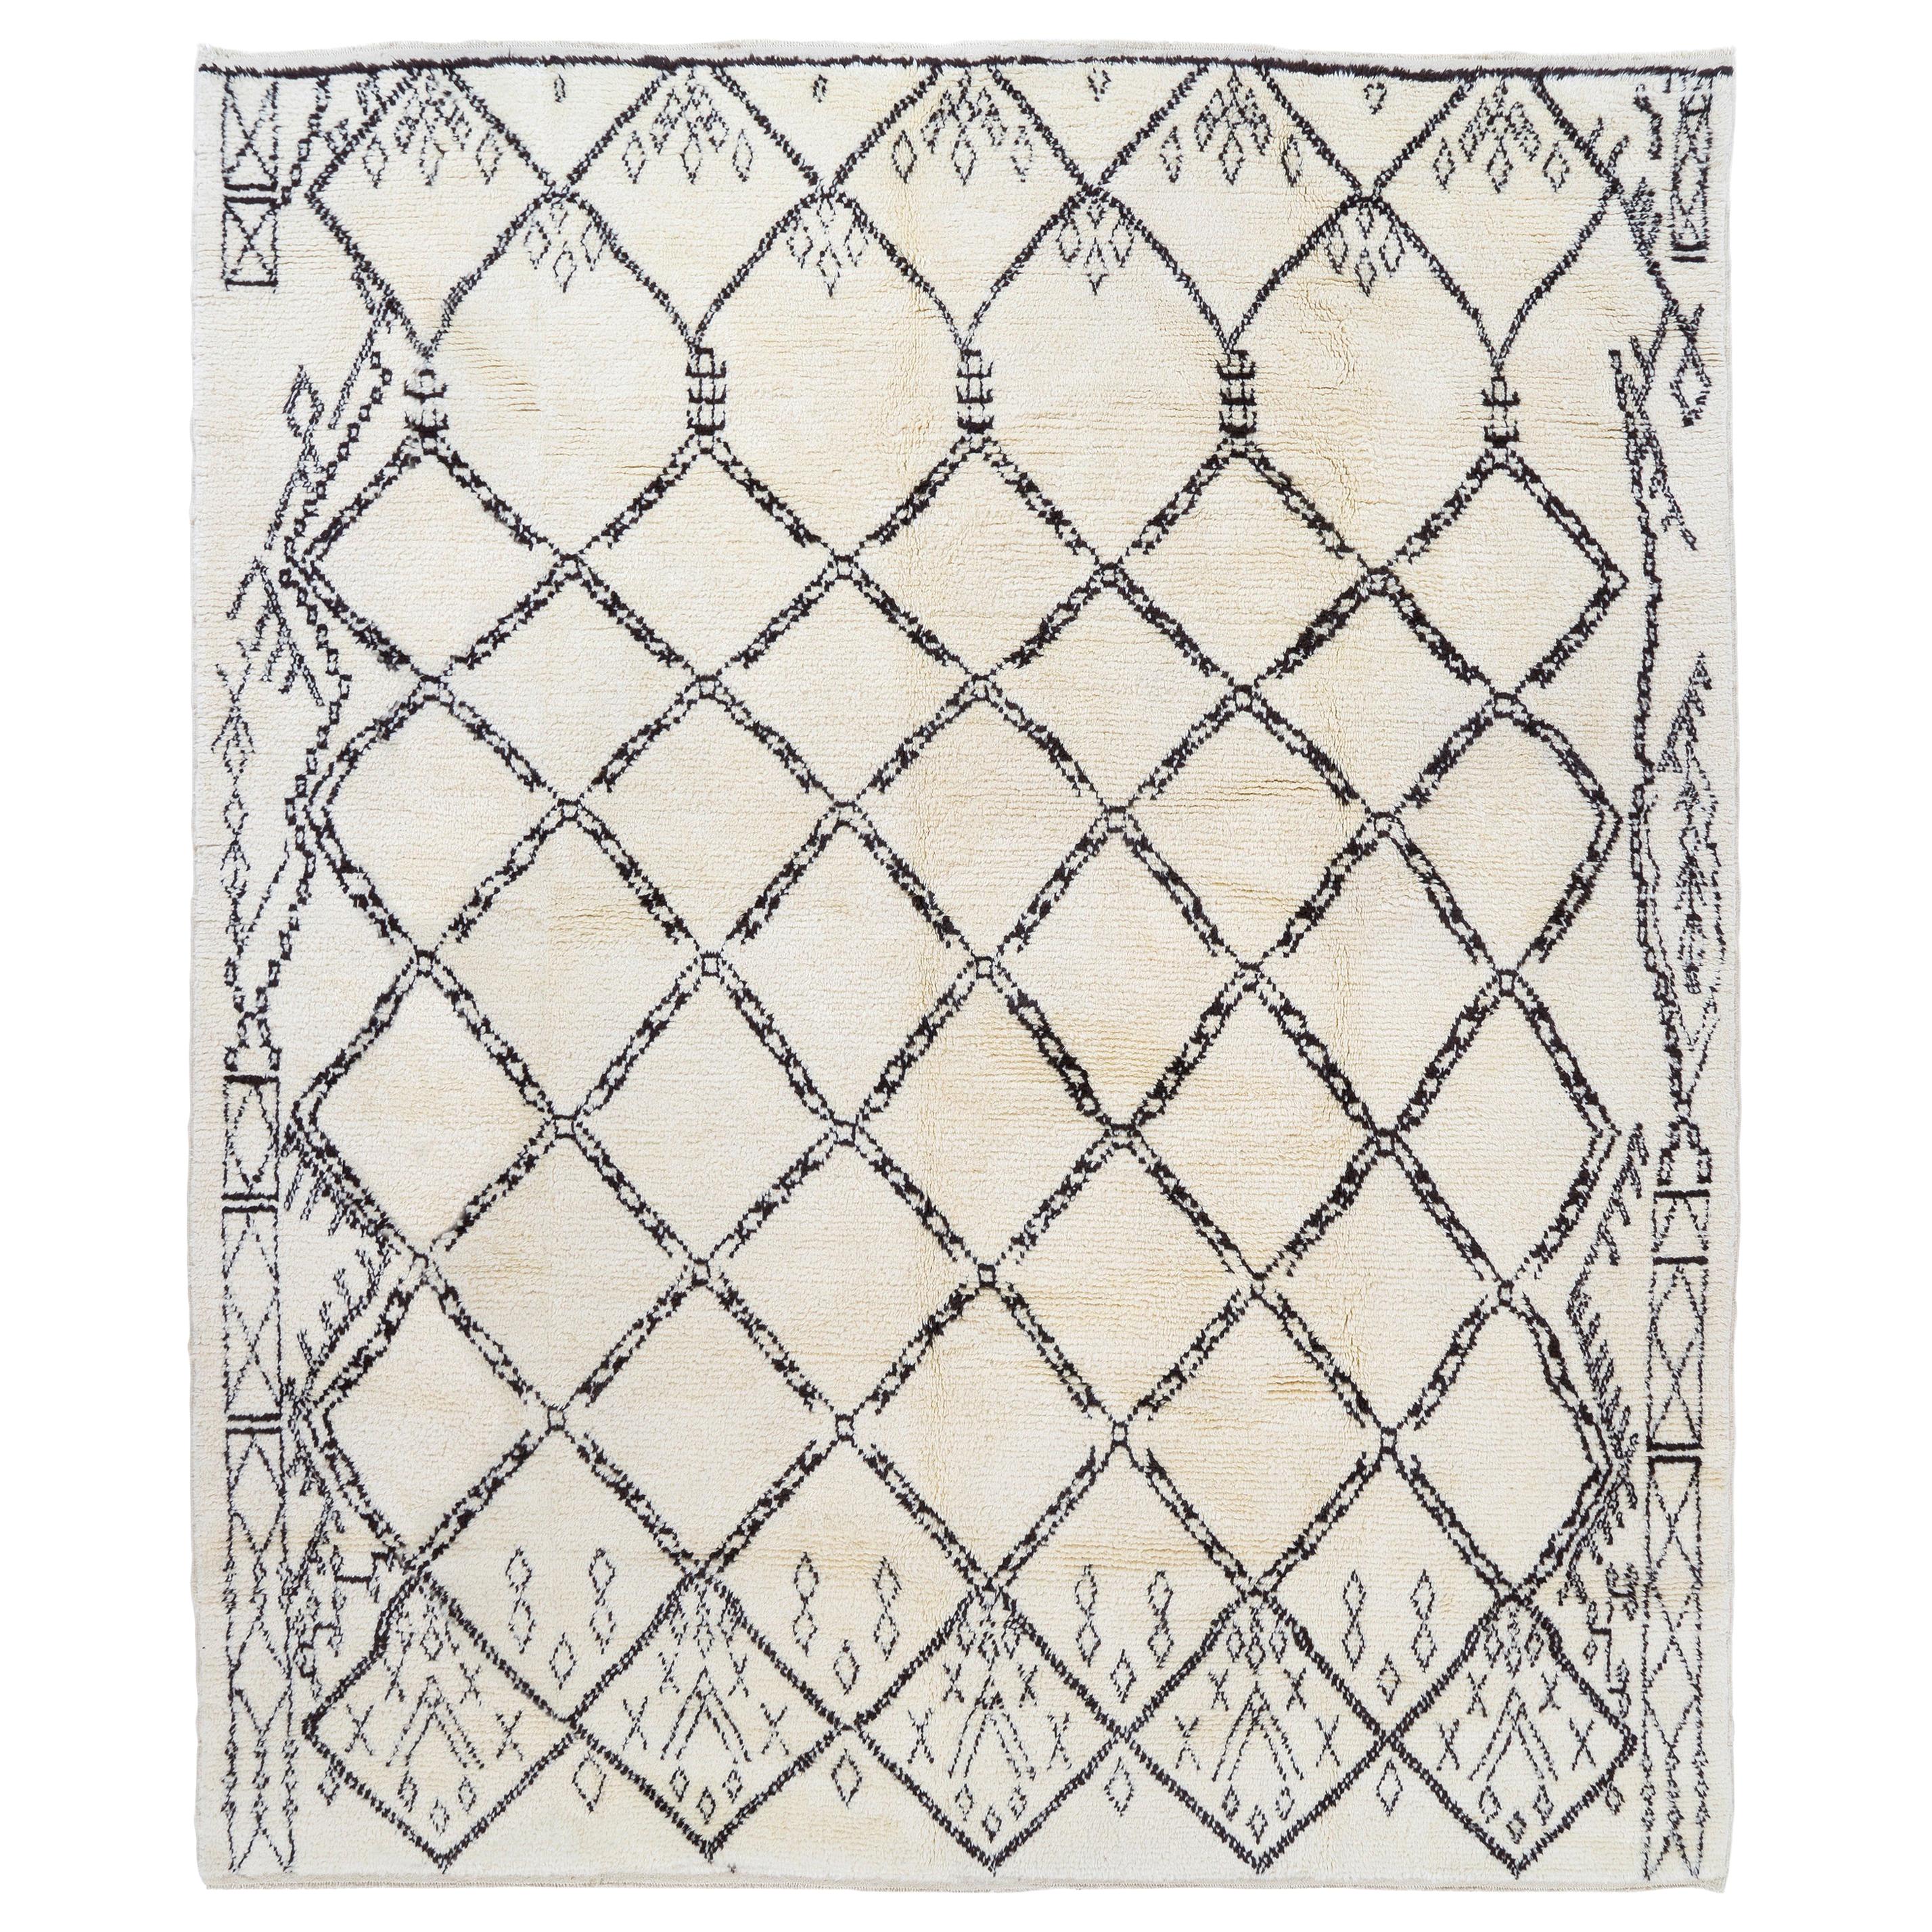 10x14 Ft Contemporary Moroccan Berber Wool "Tulu" Rug. Custom Options Available For Sale